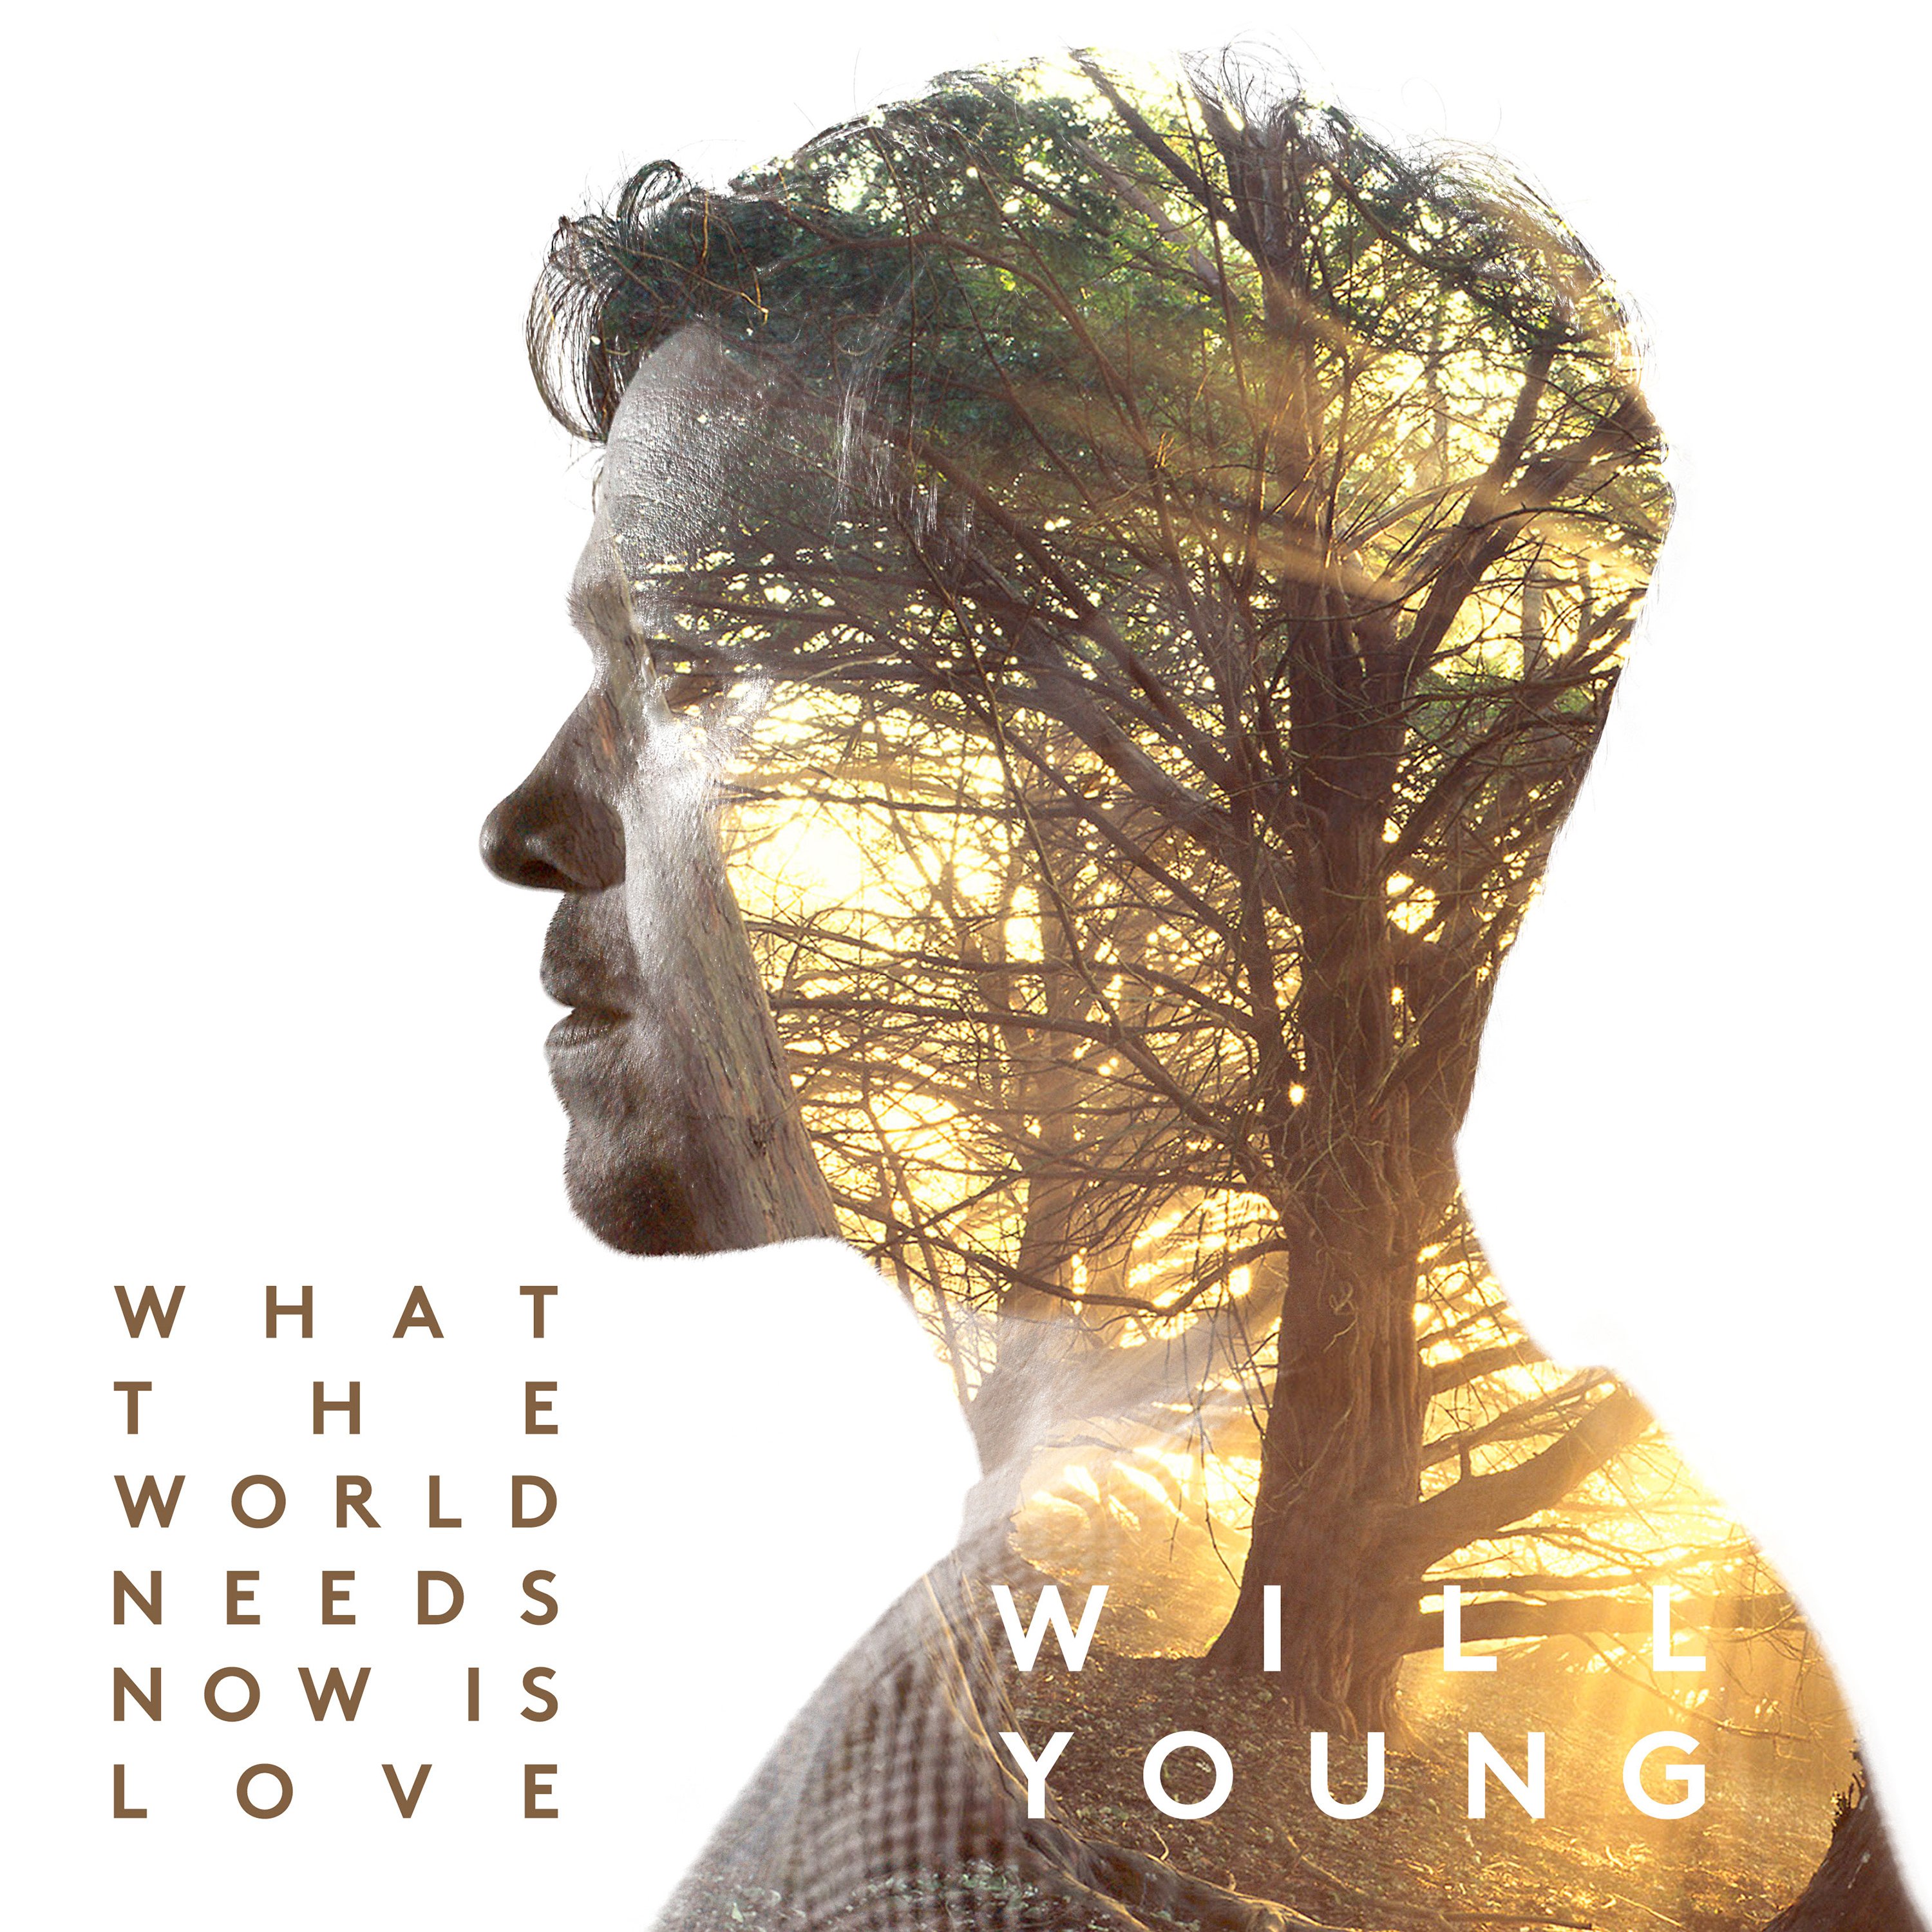 Will young обложки альбомы. Will young - what the World needs Now is Love. What the World needs Now (is Love) саундтрек. What the world needs now is love